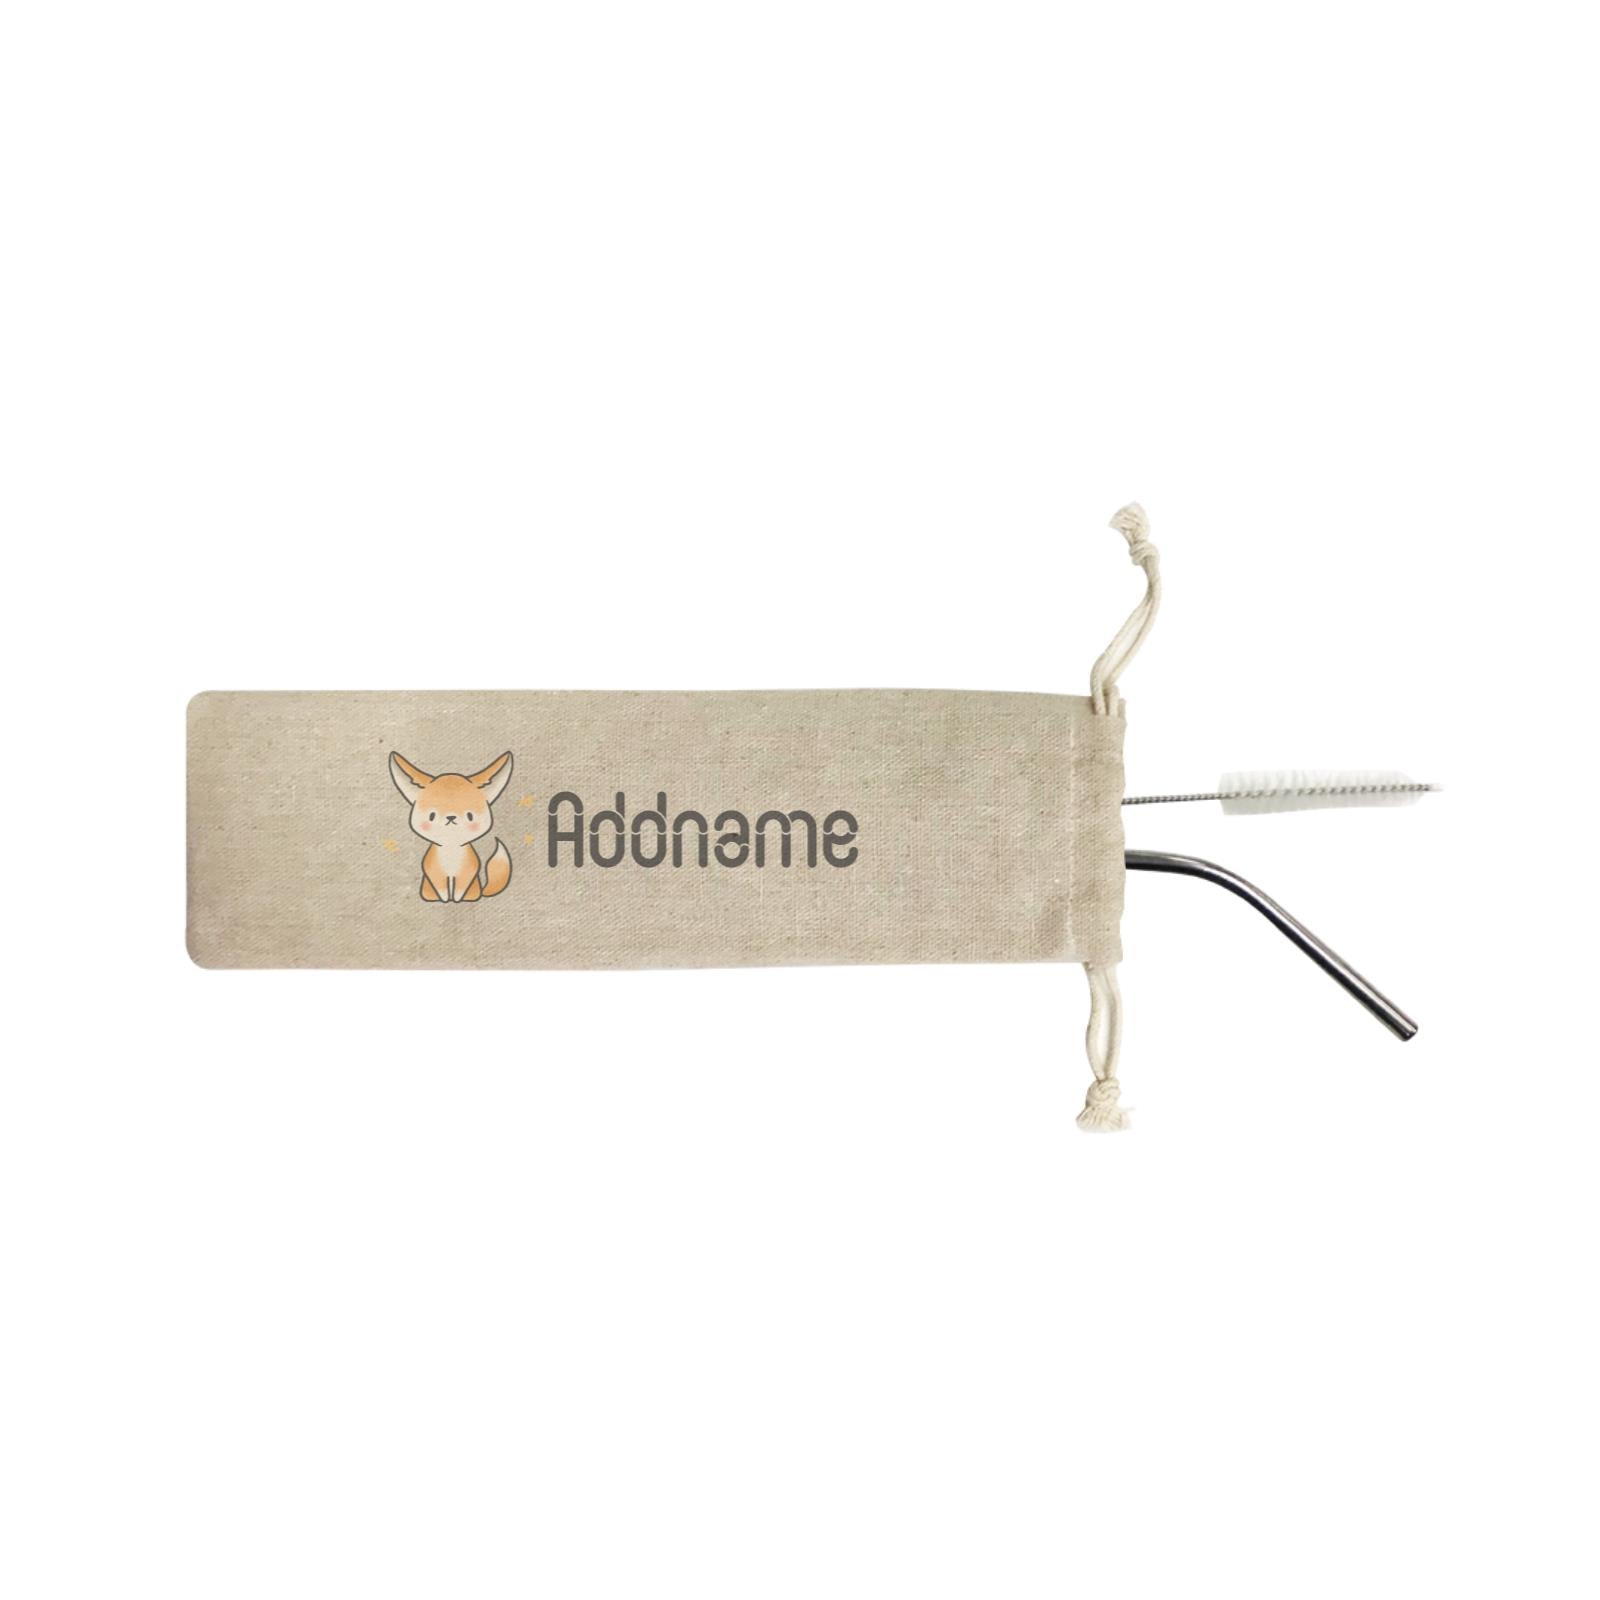 Cute Hand Drawn Style Fennec Fox Addname ST SZP 2-in-1 Stainless Steel Straw Set In a Satchel